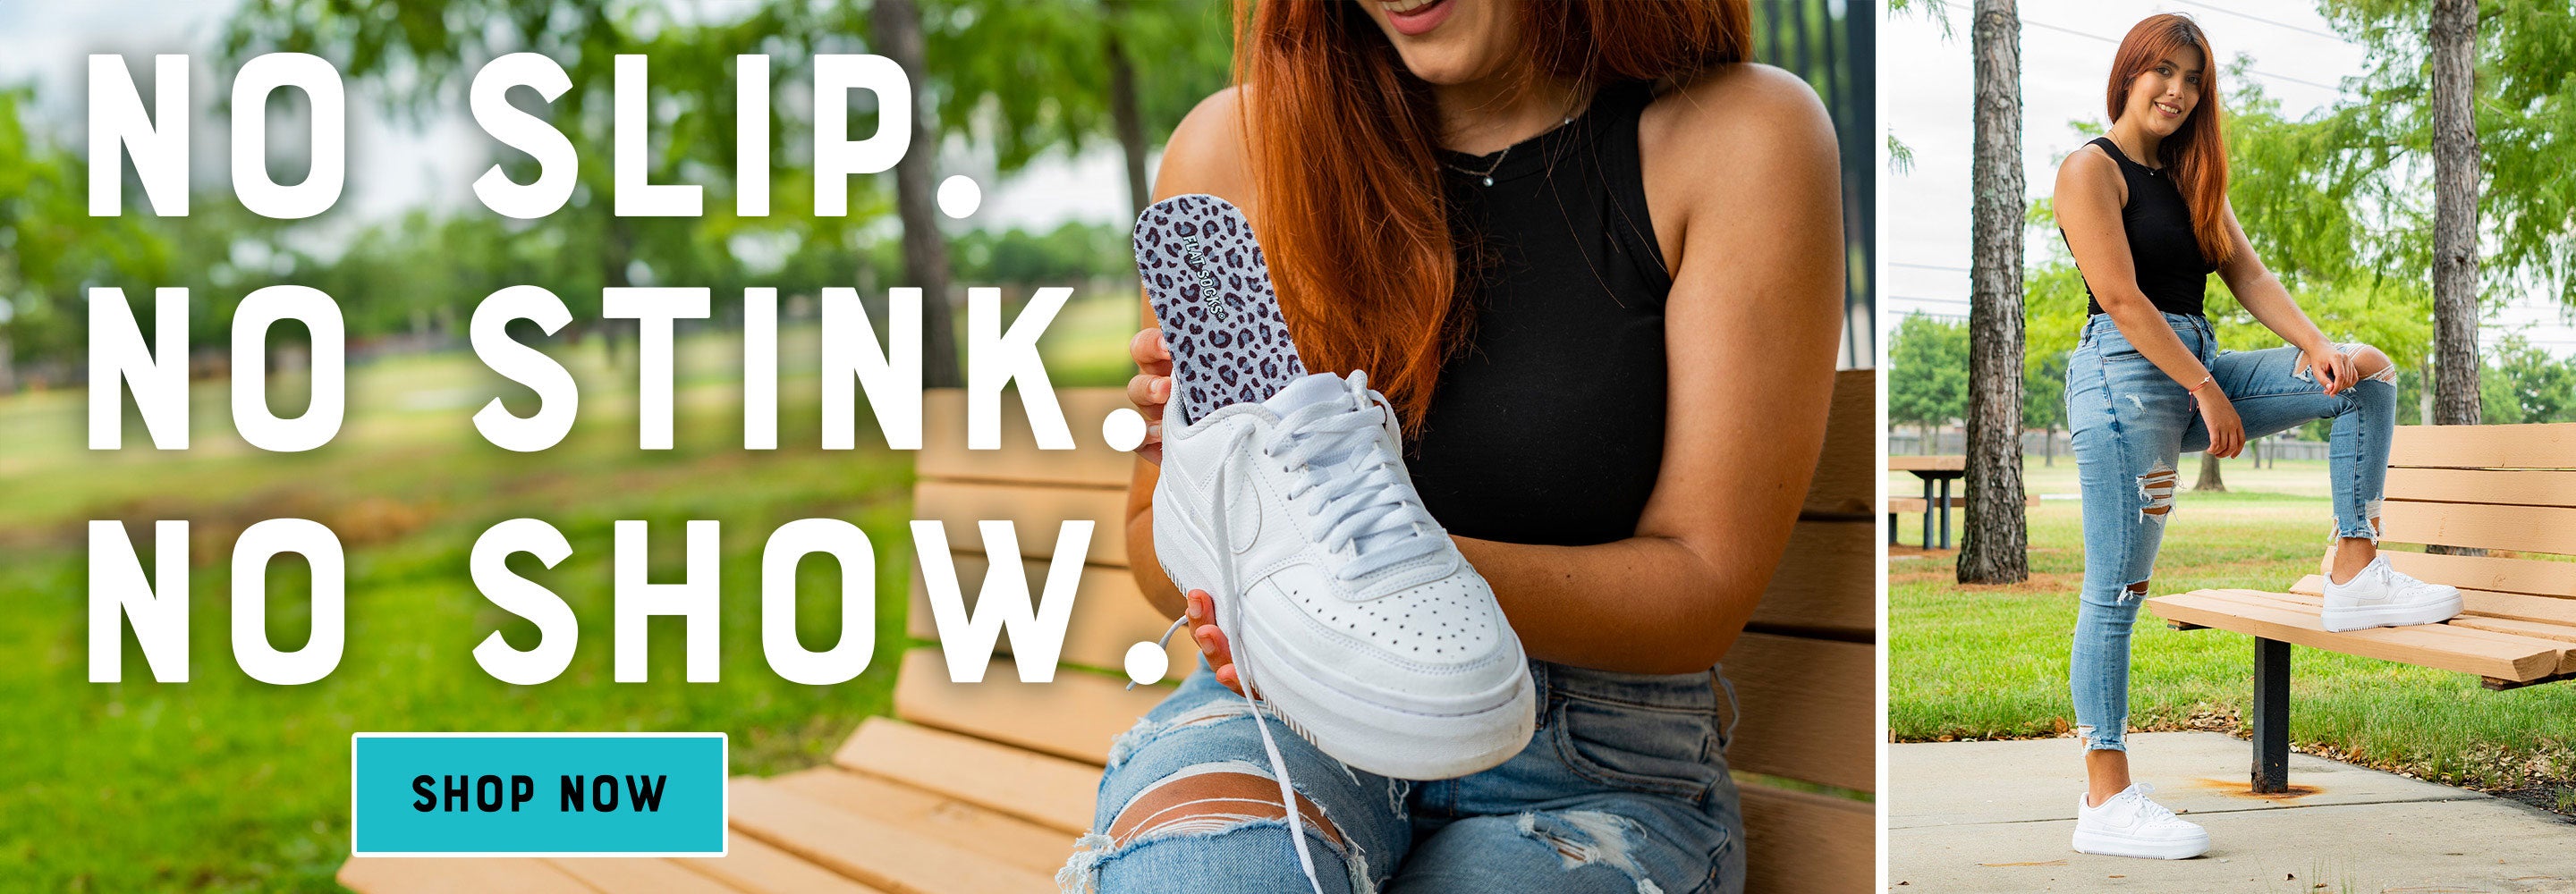 Woman placing leopard FLAT SOCKS into white sneakers. FLAT SOCKS: No Slip. No Stink. No Show. Shop Now.